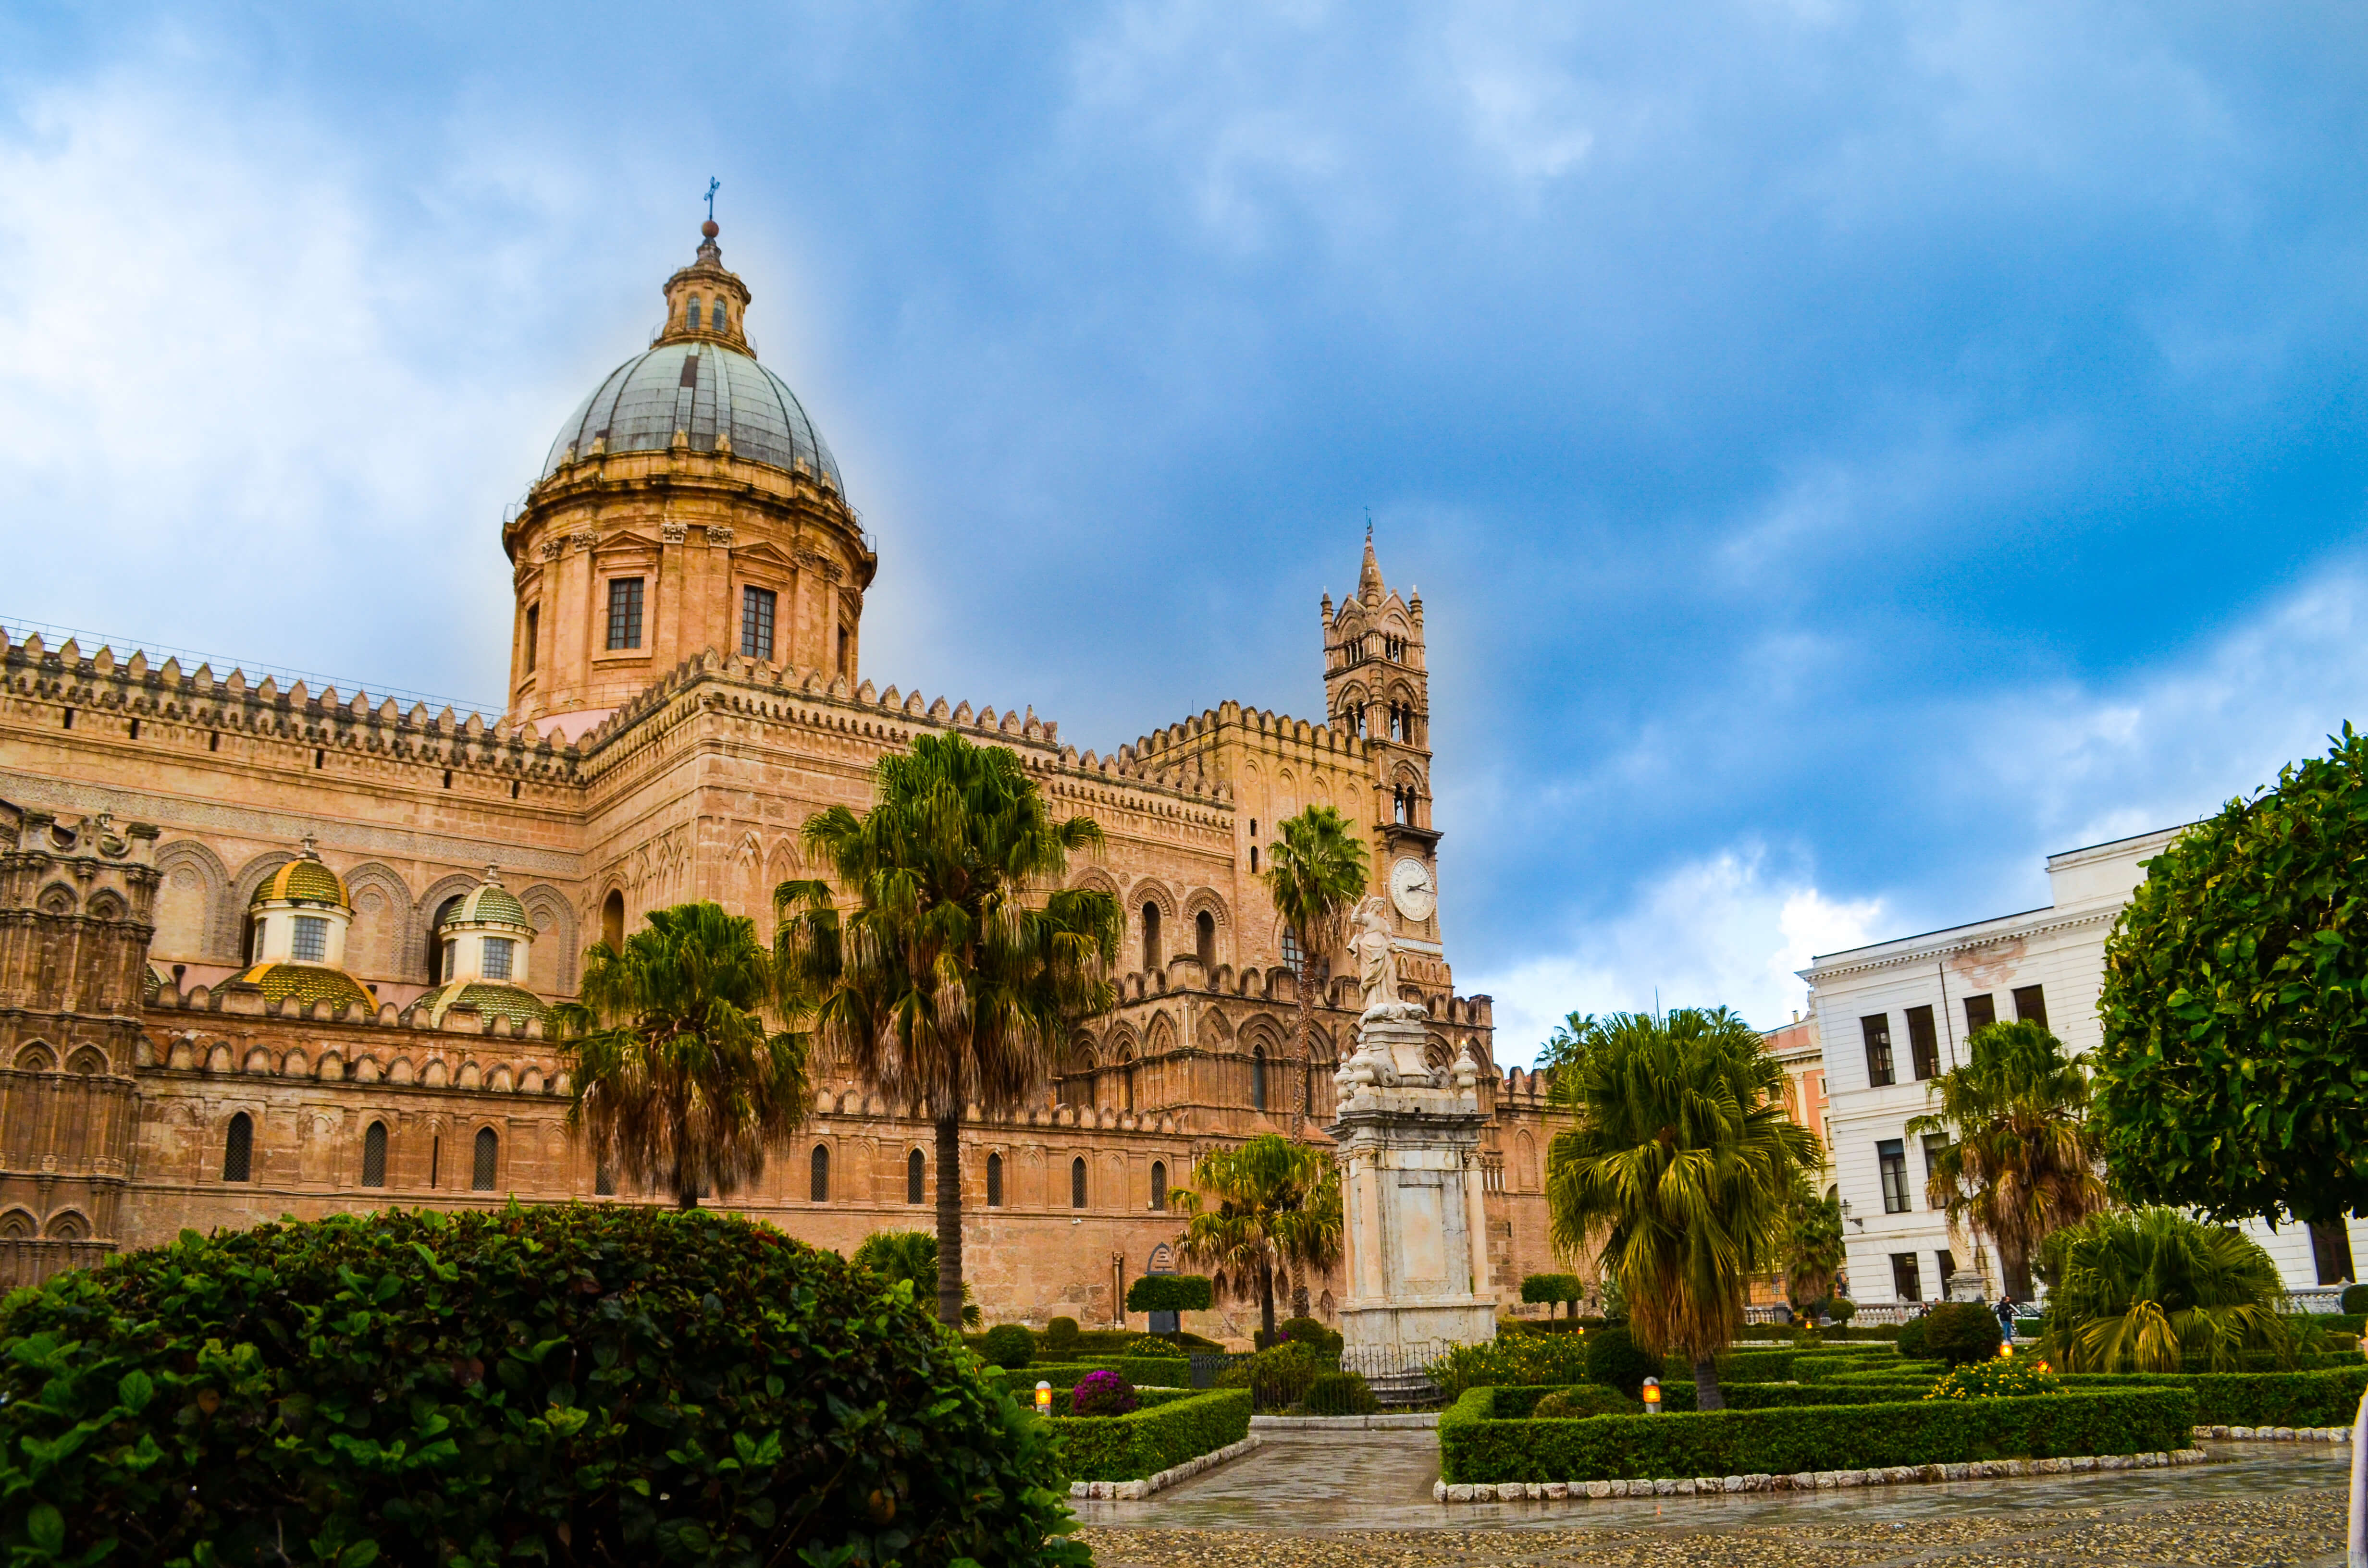 Palermo street food tour with Streaty - Palermo cathedral